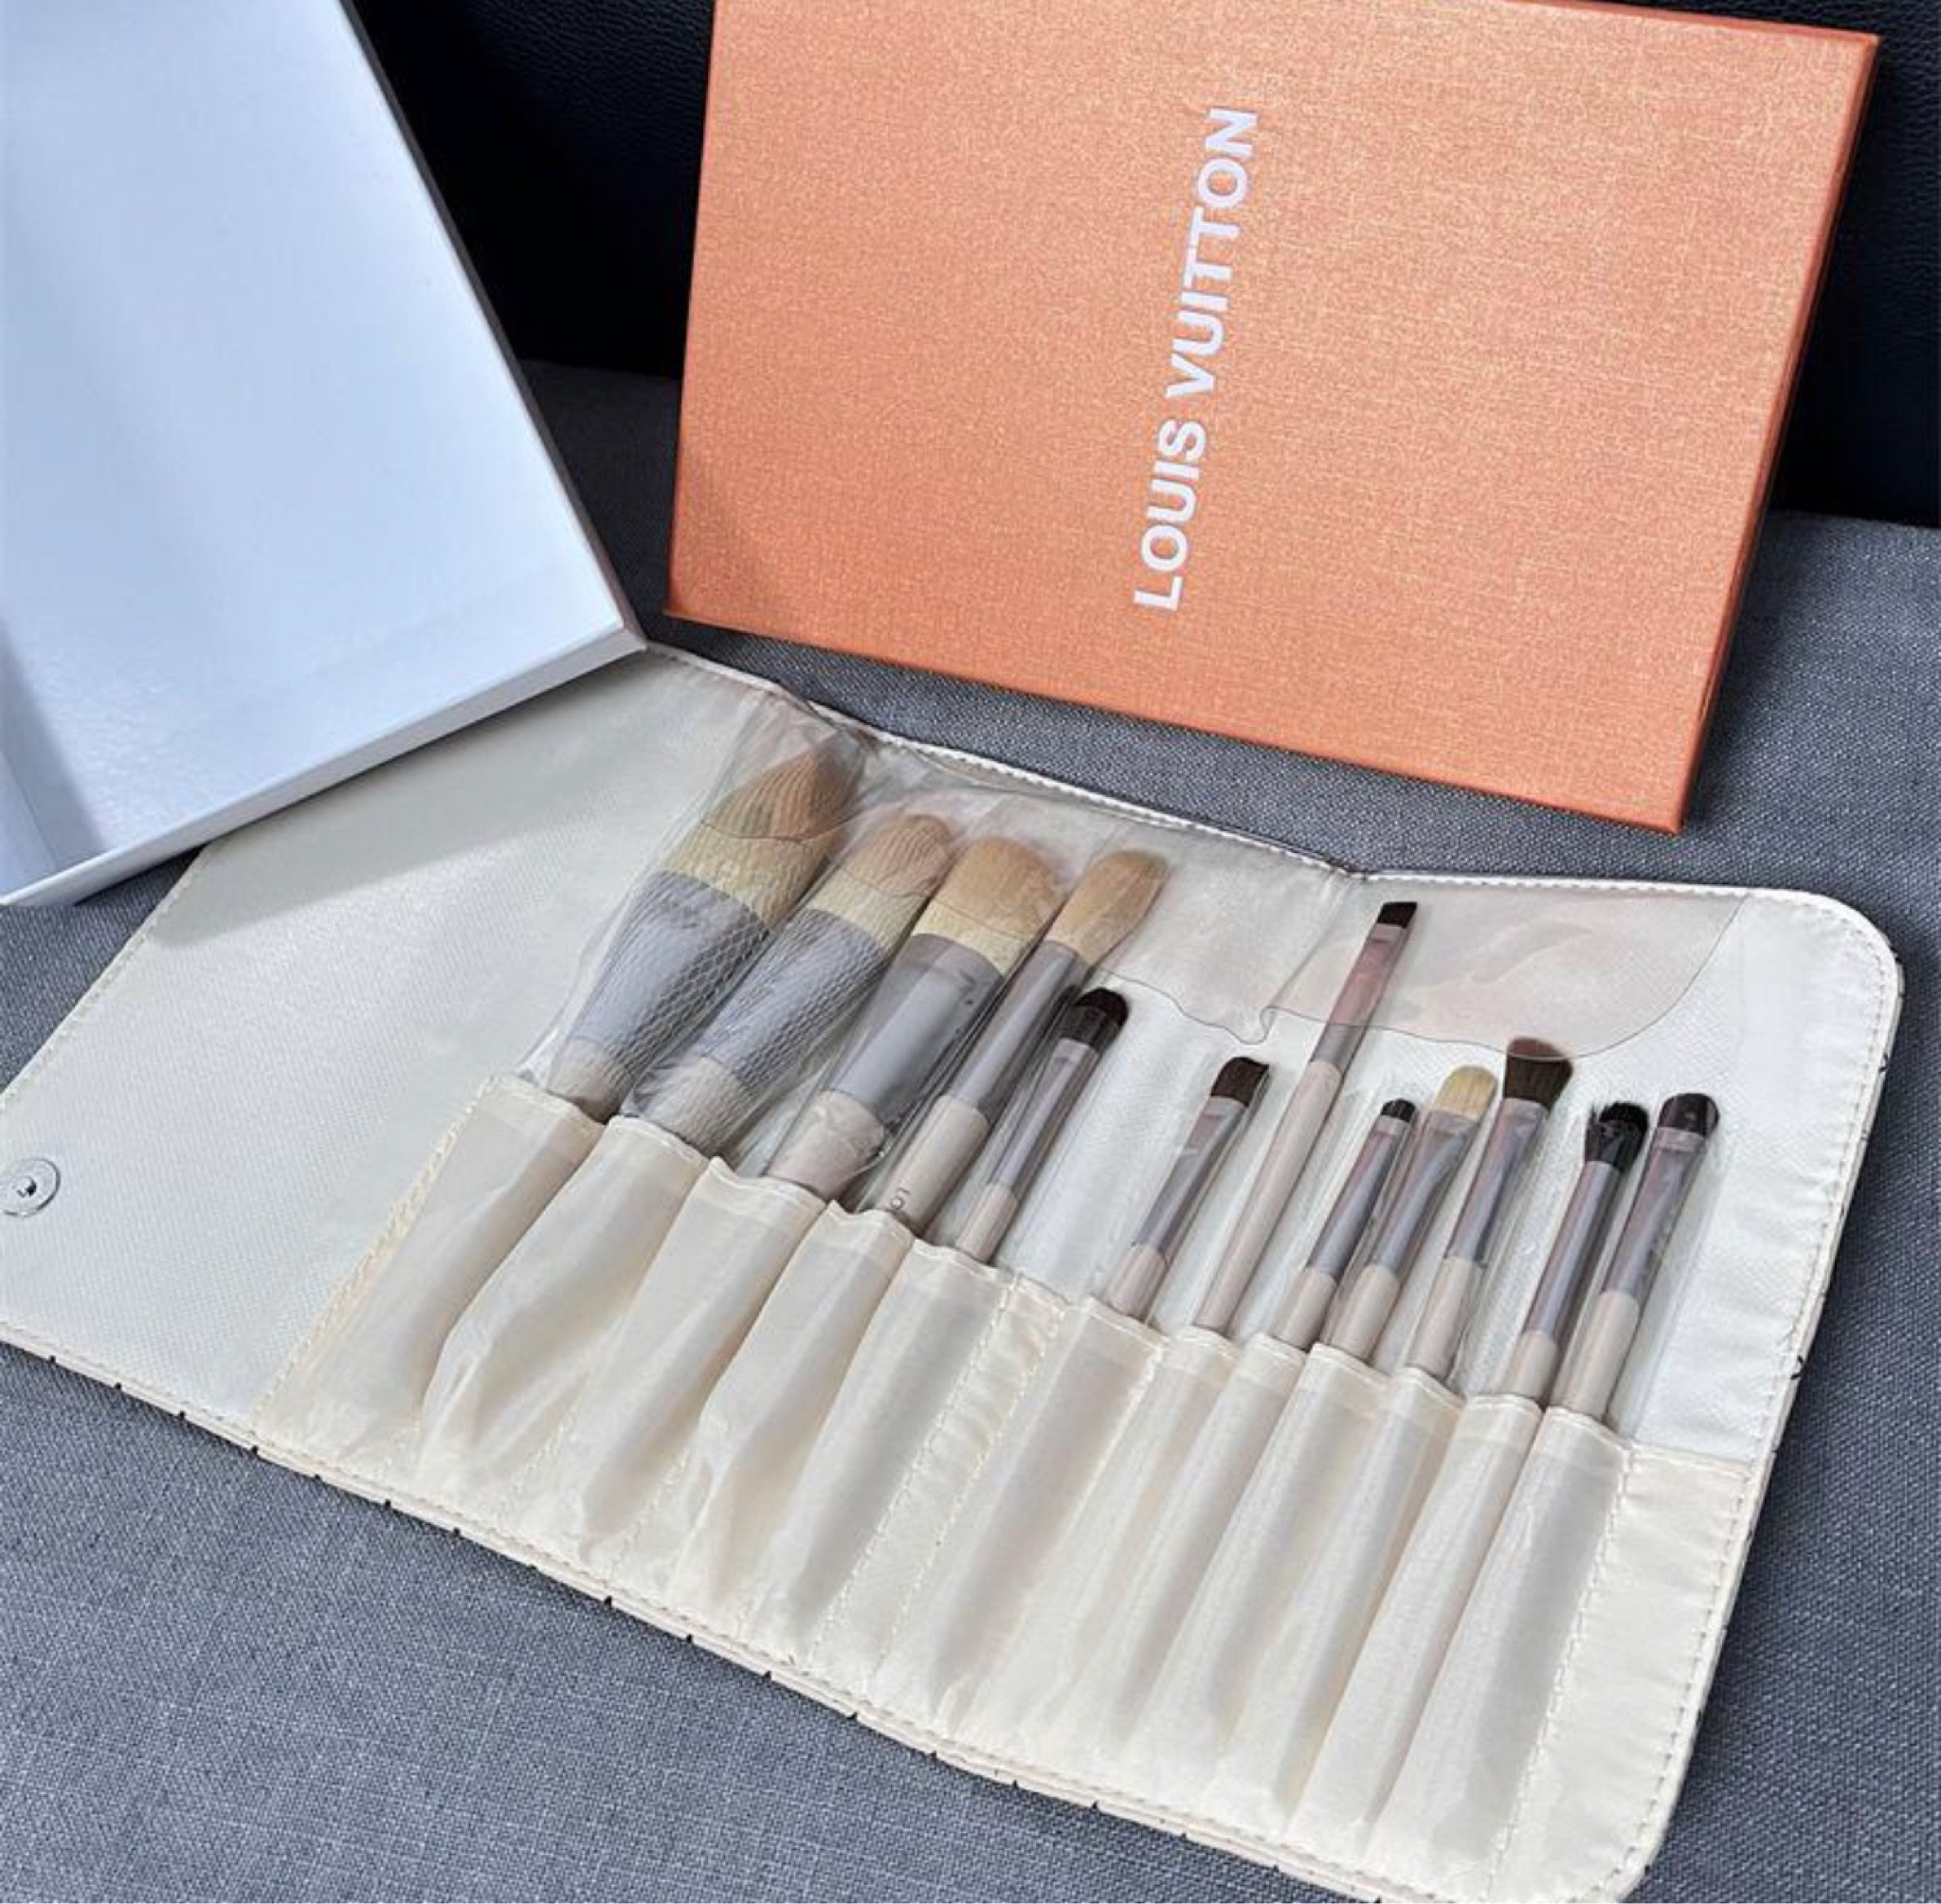 Doesn't have to be louis vouton but a brush set would be nice